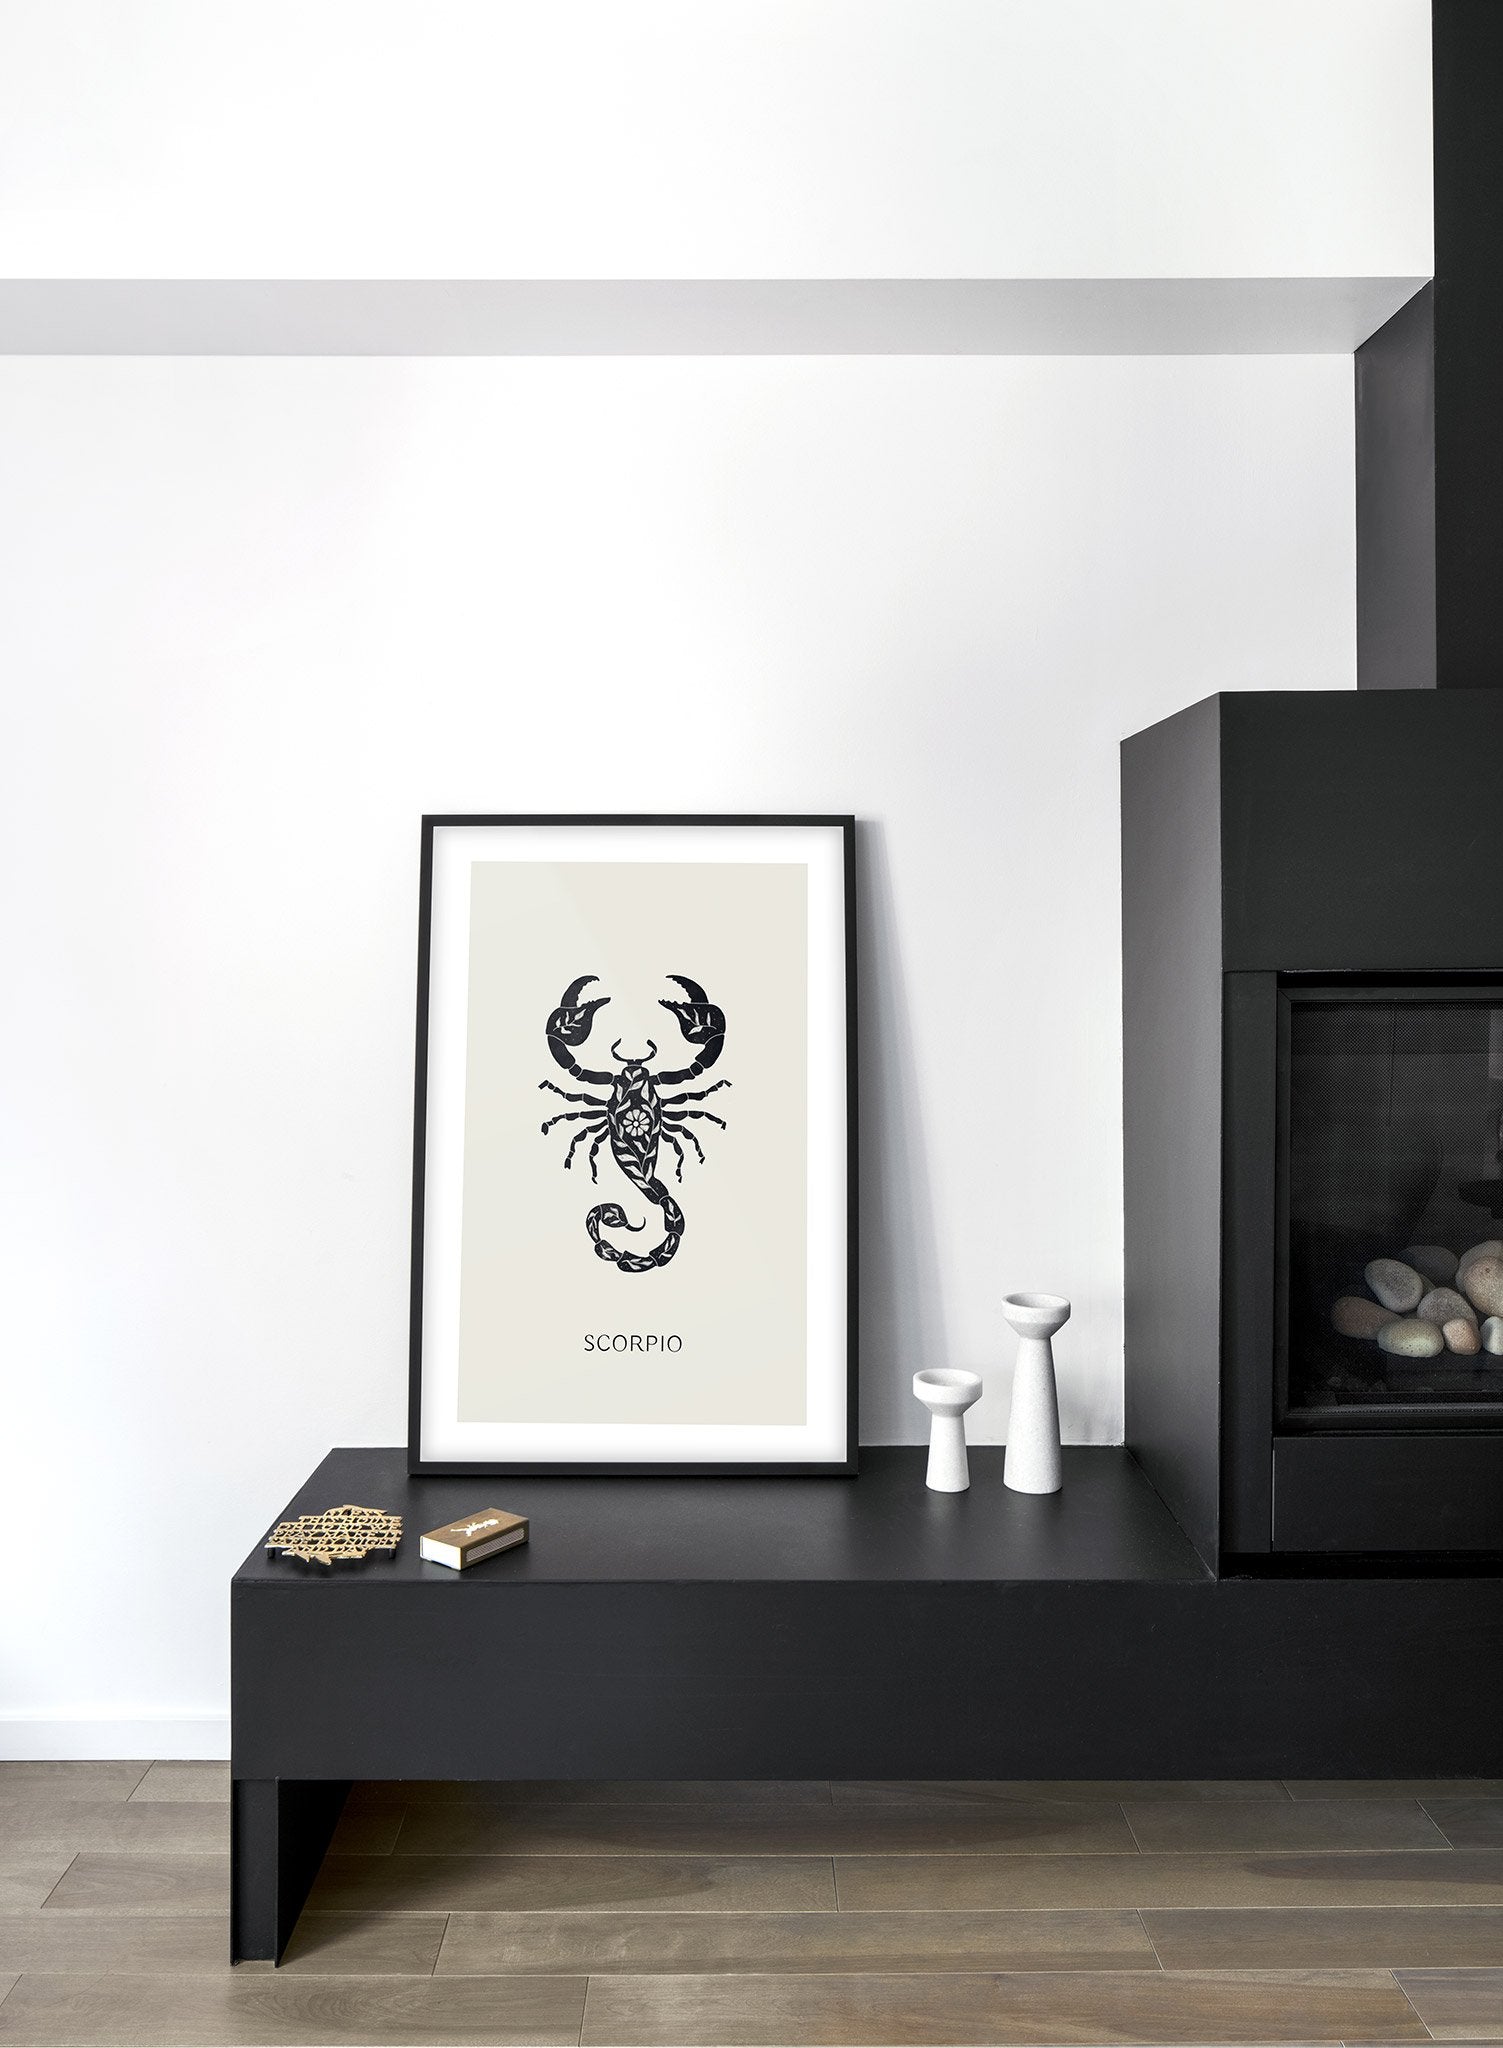 Celestial illustration poster by Opposite Wall with horoscope zodiac symbol of Scorpio - Lifestyle - Living Room